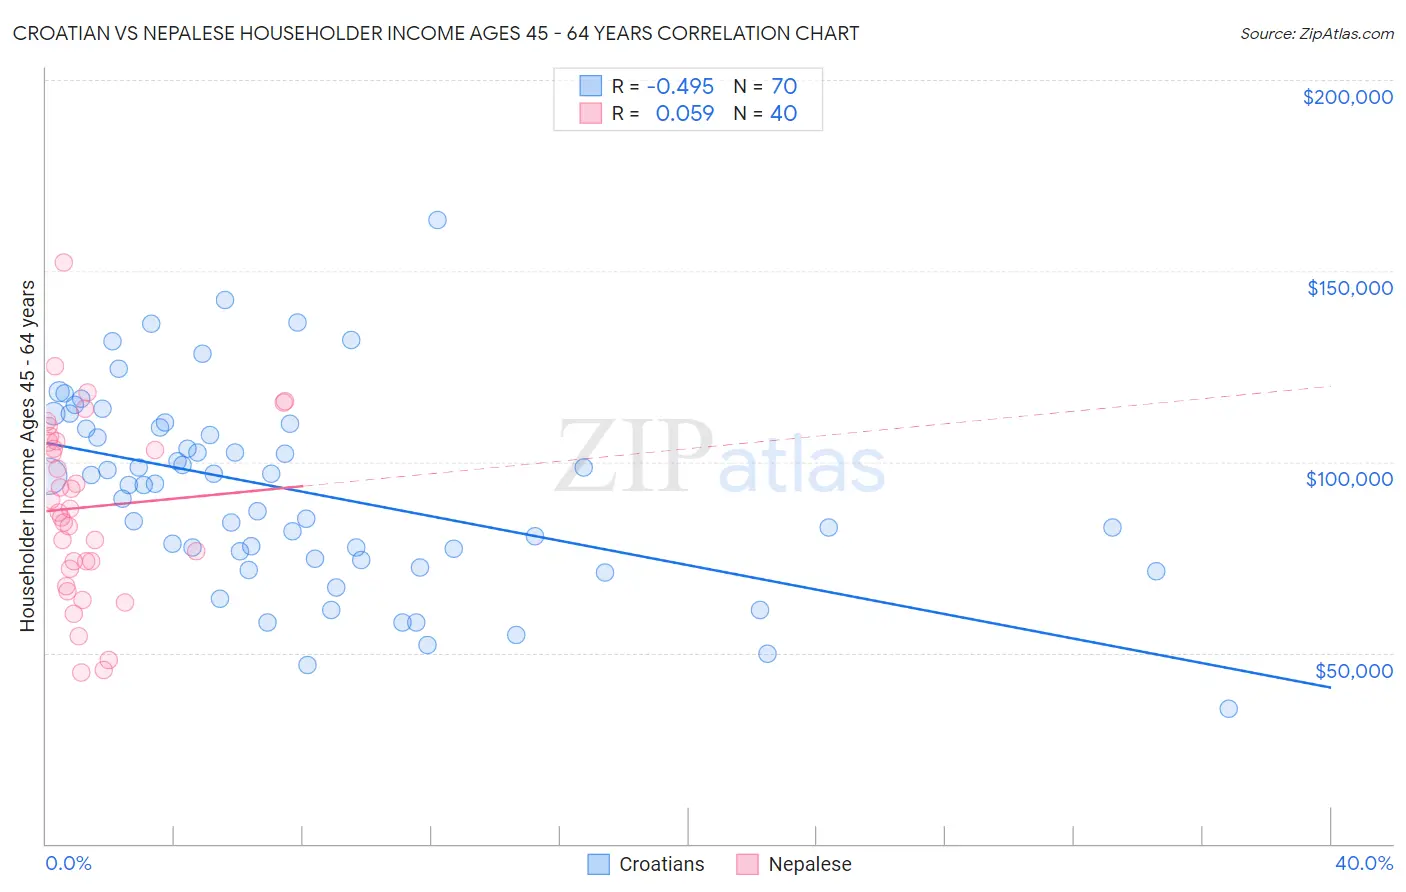 Croatian vs Nepalese Householder Income Ages 45 - 64 years